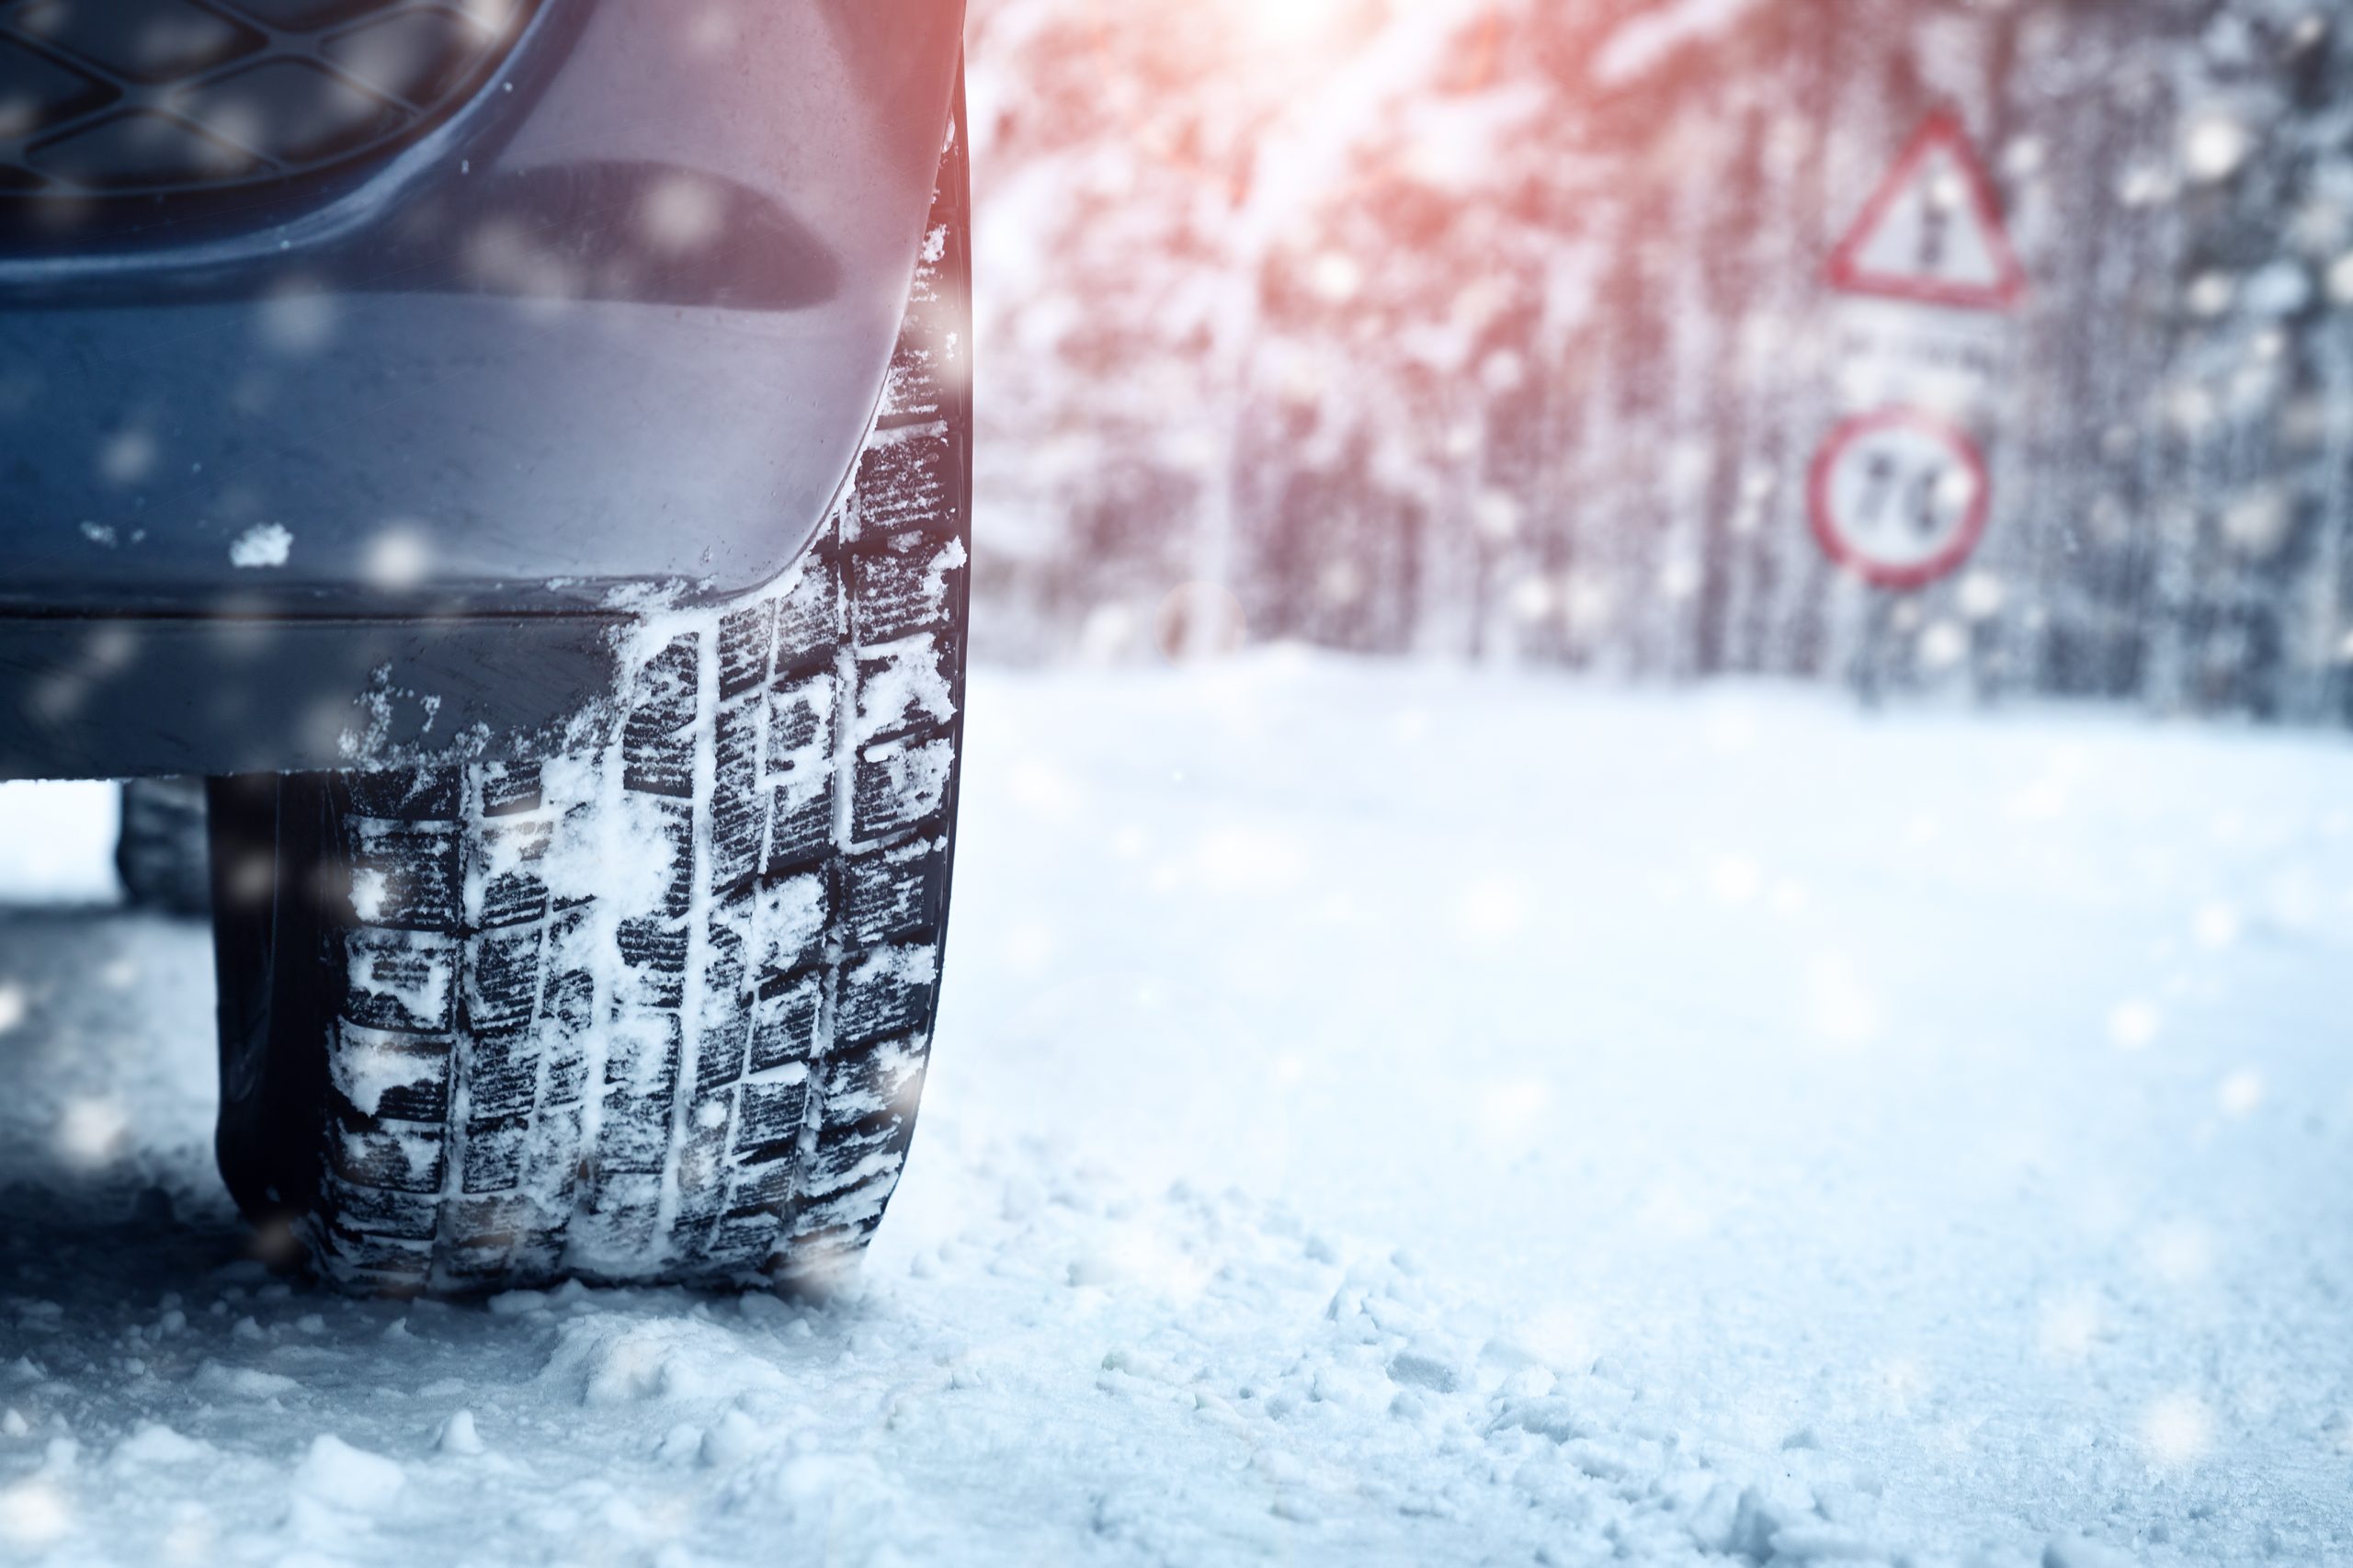 A photo of a car tire driving on a snowy road